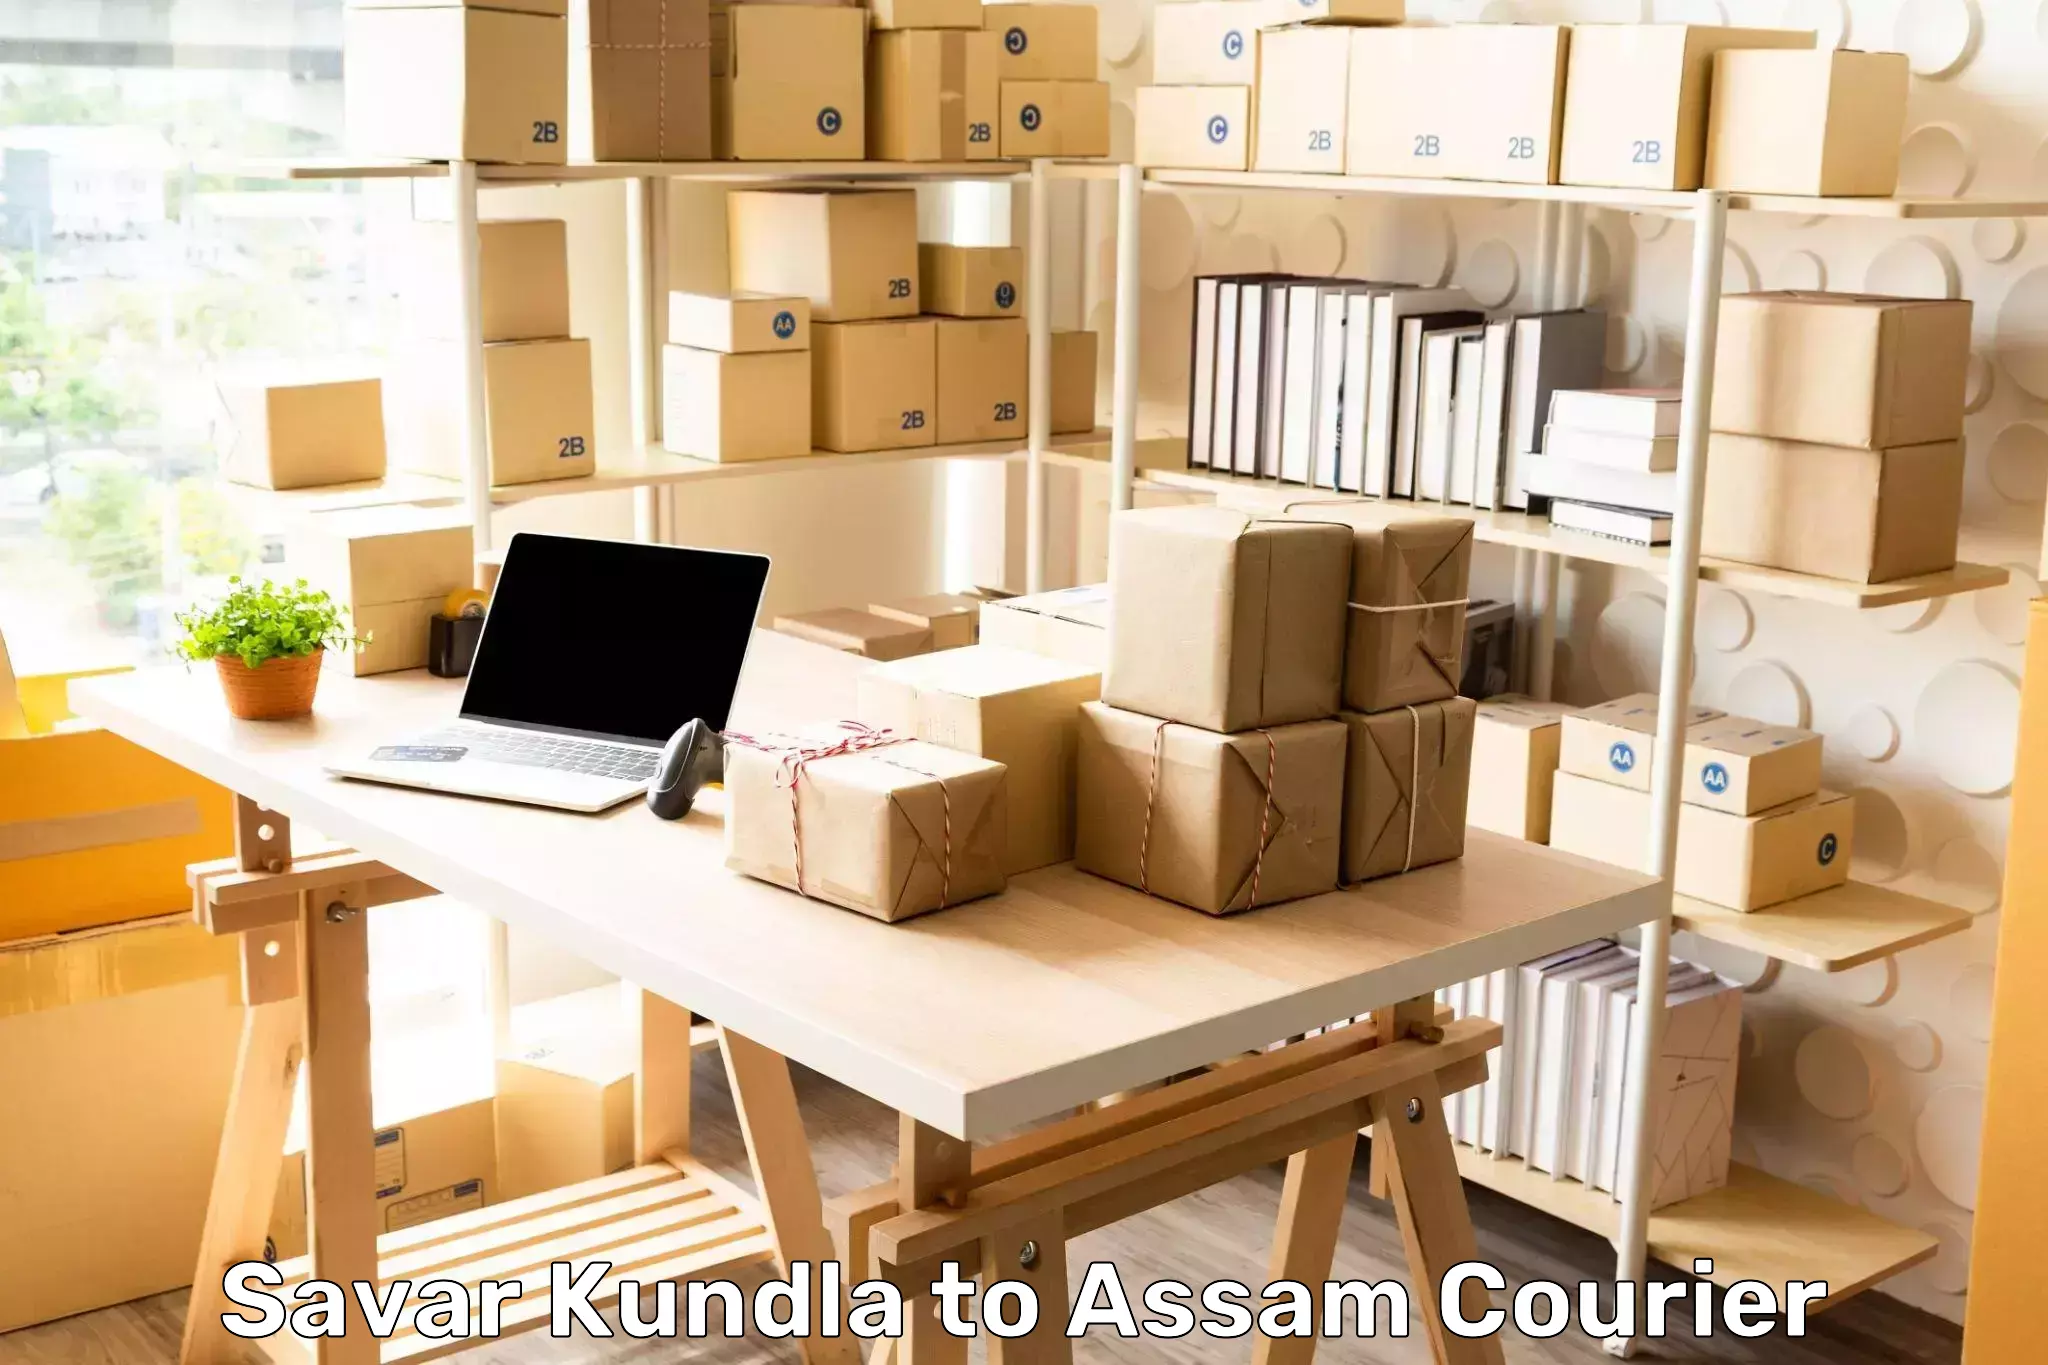 Cost-effective courier solutions Savar Kundla to Demow